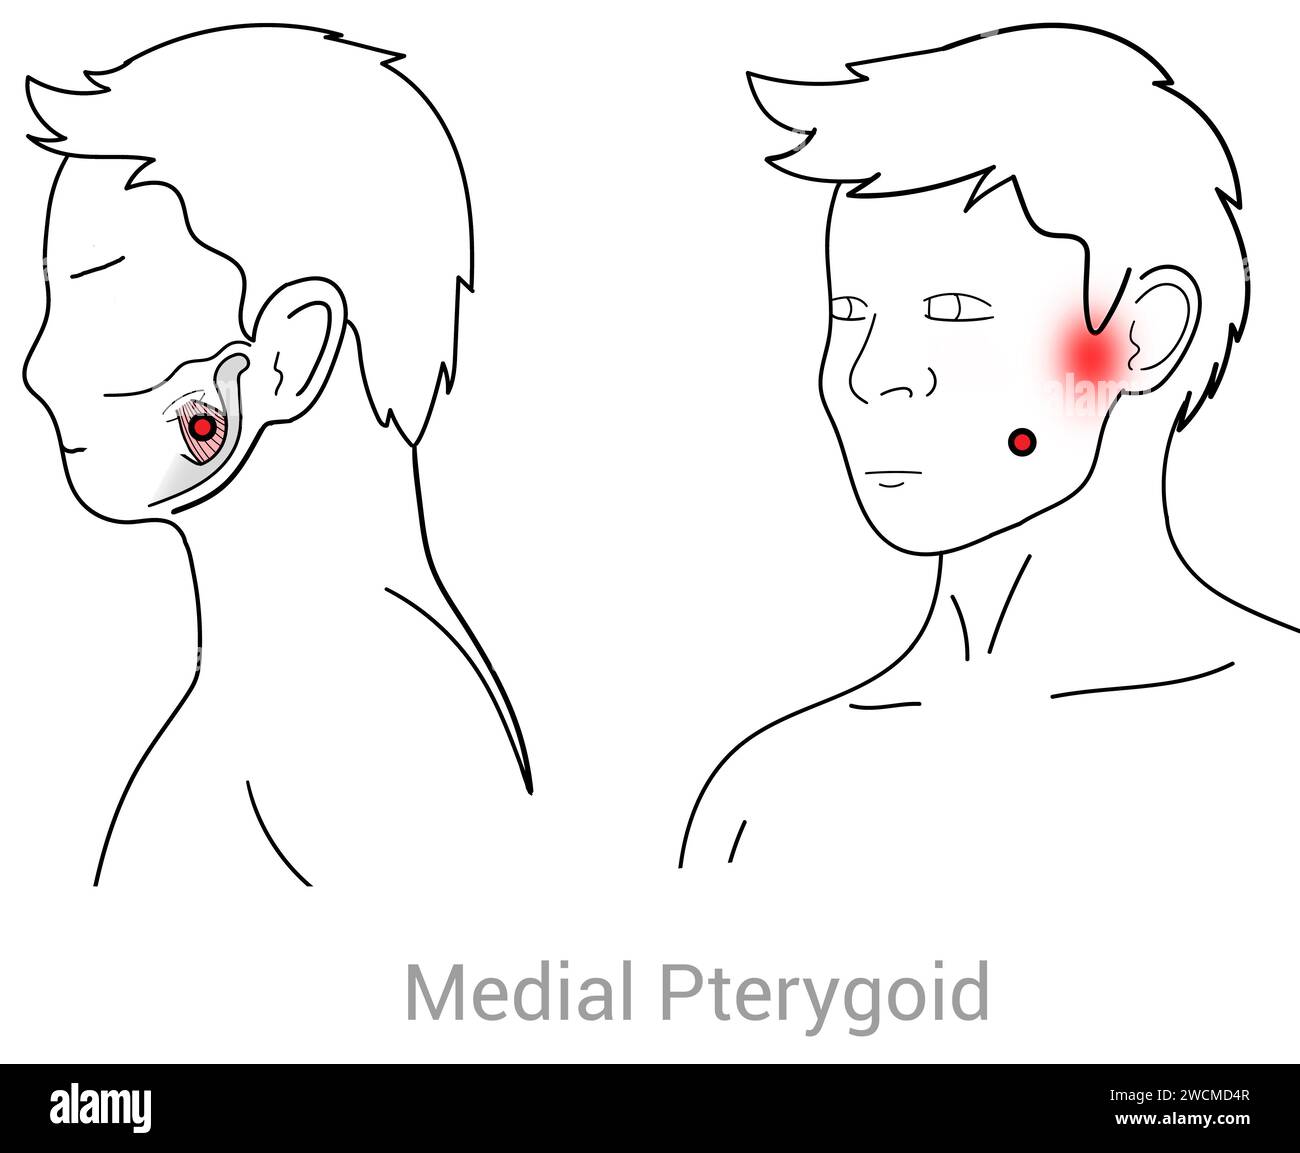 Medial Pterygoid: Myofascial trigger points and associated pain locations Stock Photo